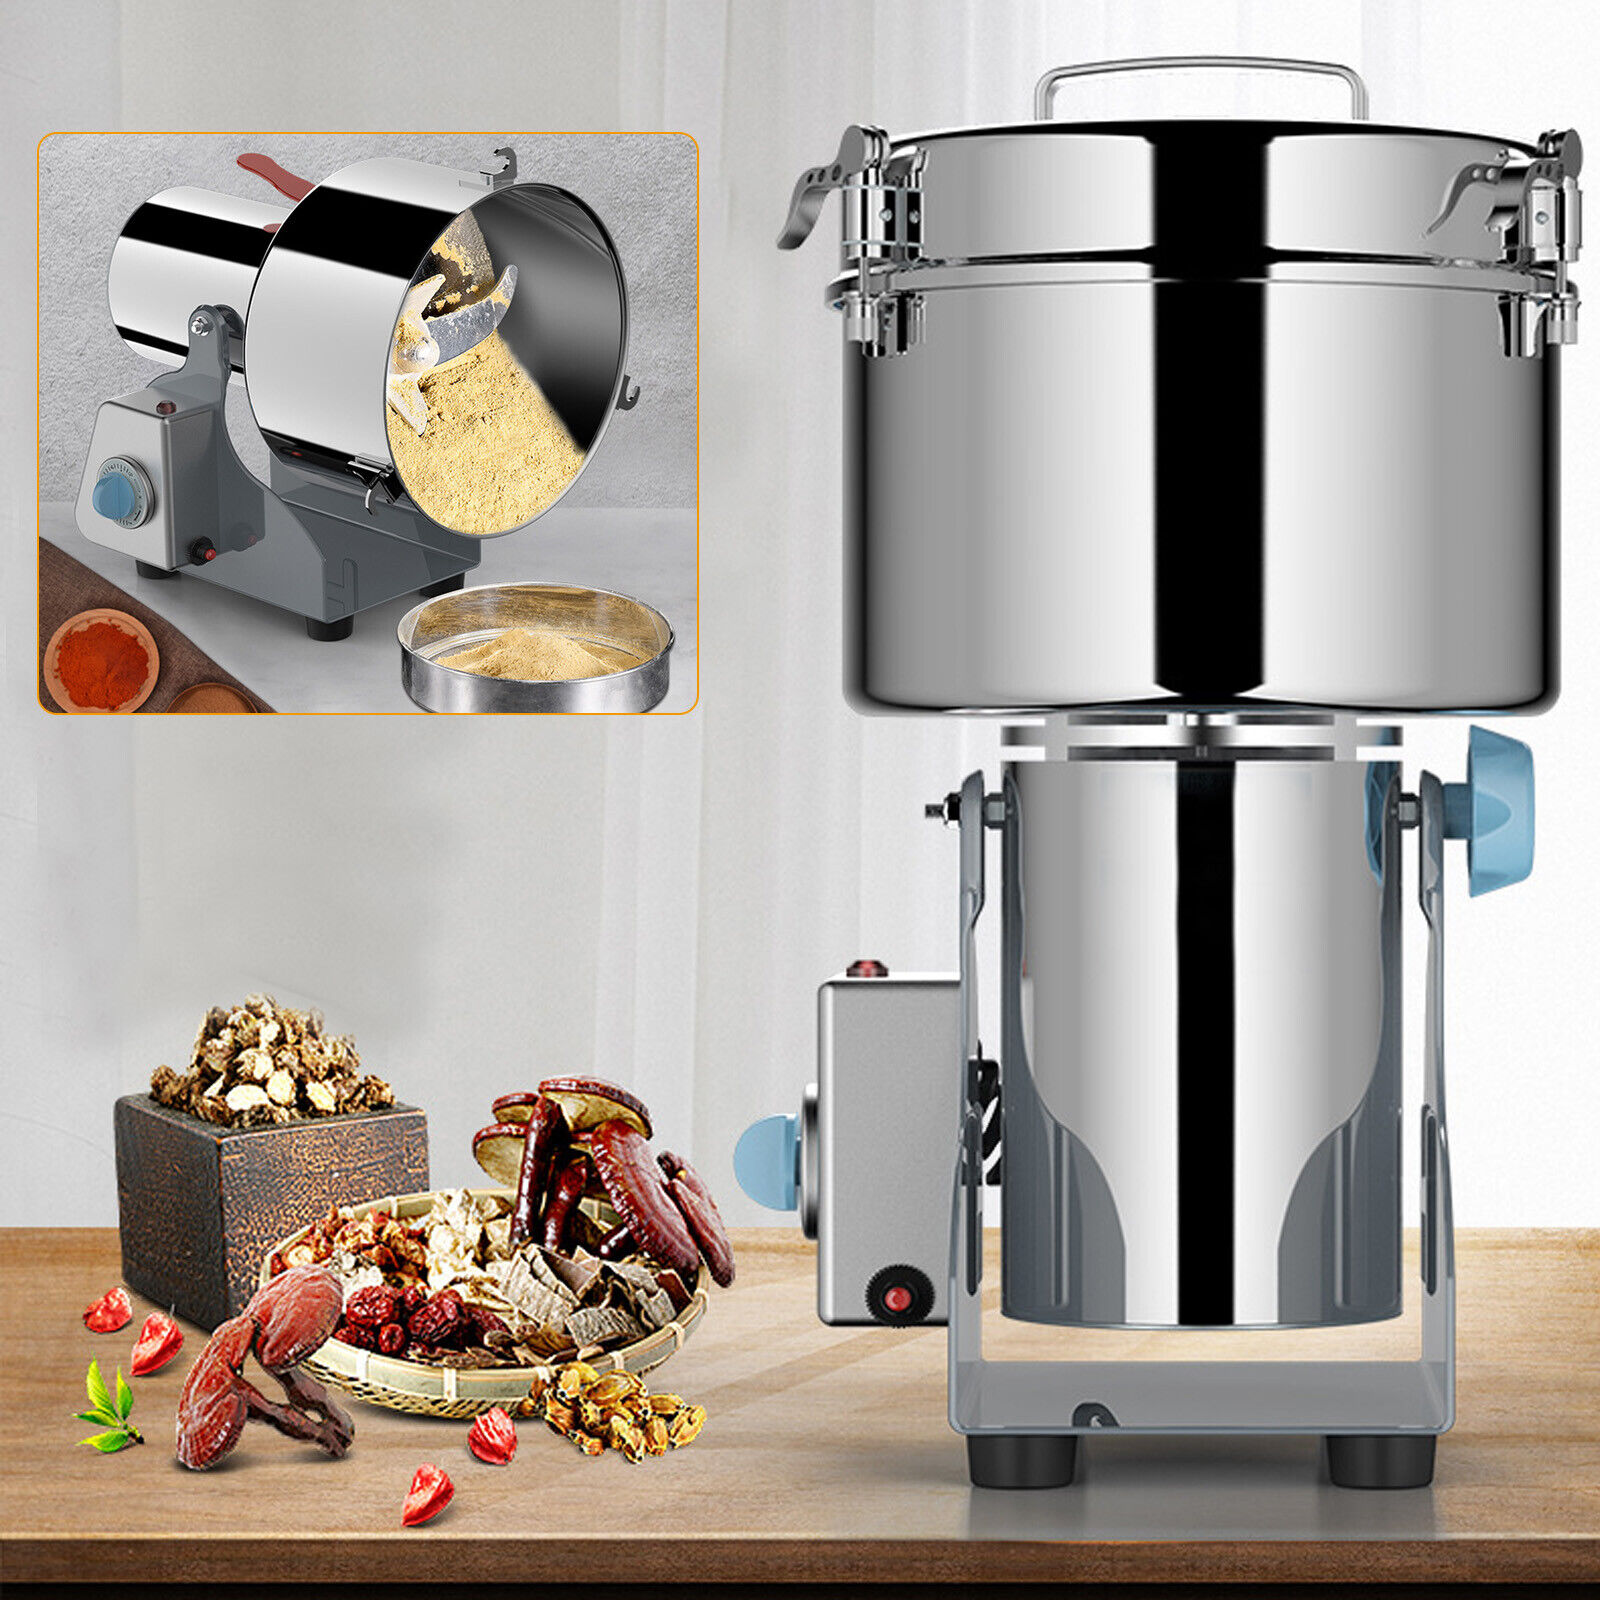 Commercial Spice Grinder Electric Grain Mill Dry Dehydrated Food Grinder 2000g 